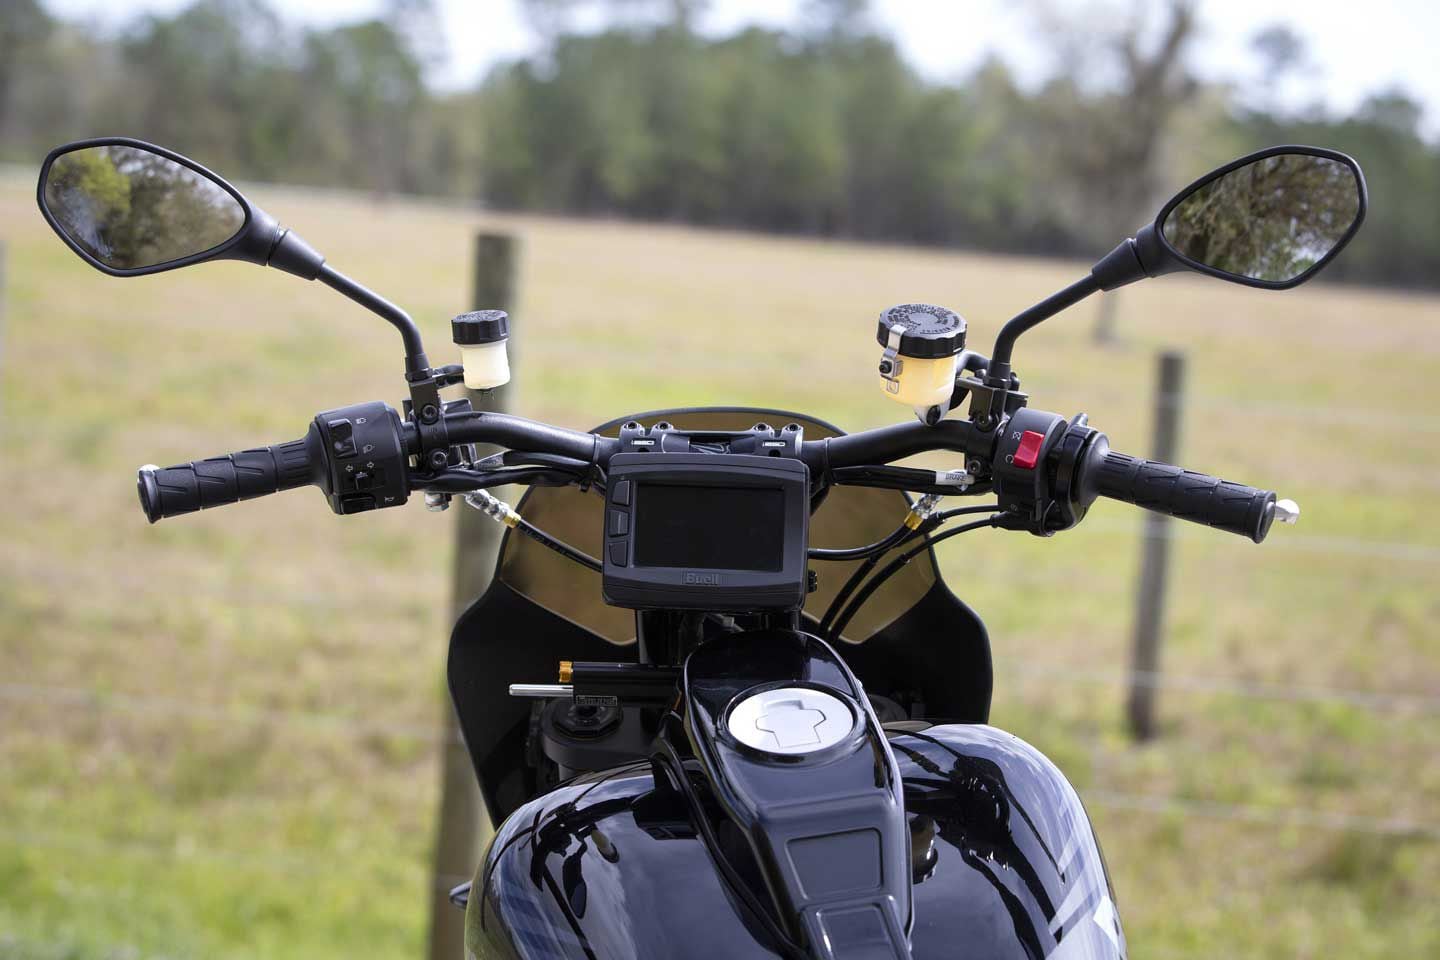 Tall, narrow bars hold switch gear and TFT display pilfered from Buell’s existing 1190 platform. The tank is new and has 4.5-gallon capacity.